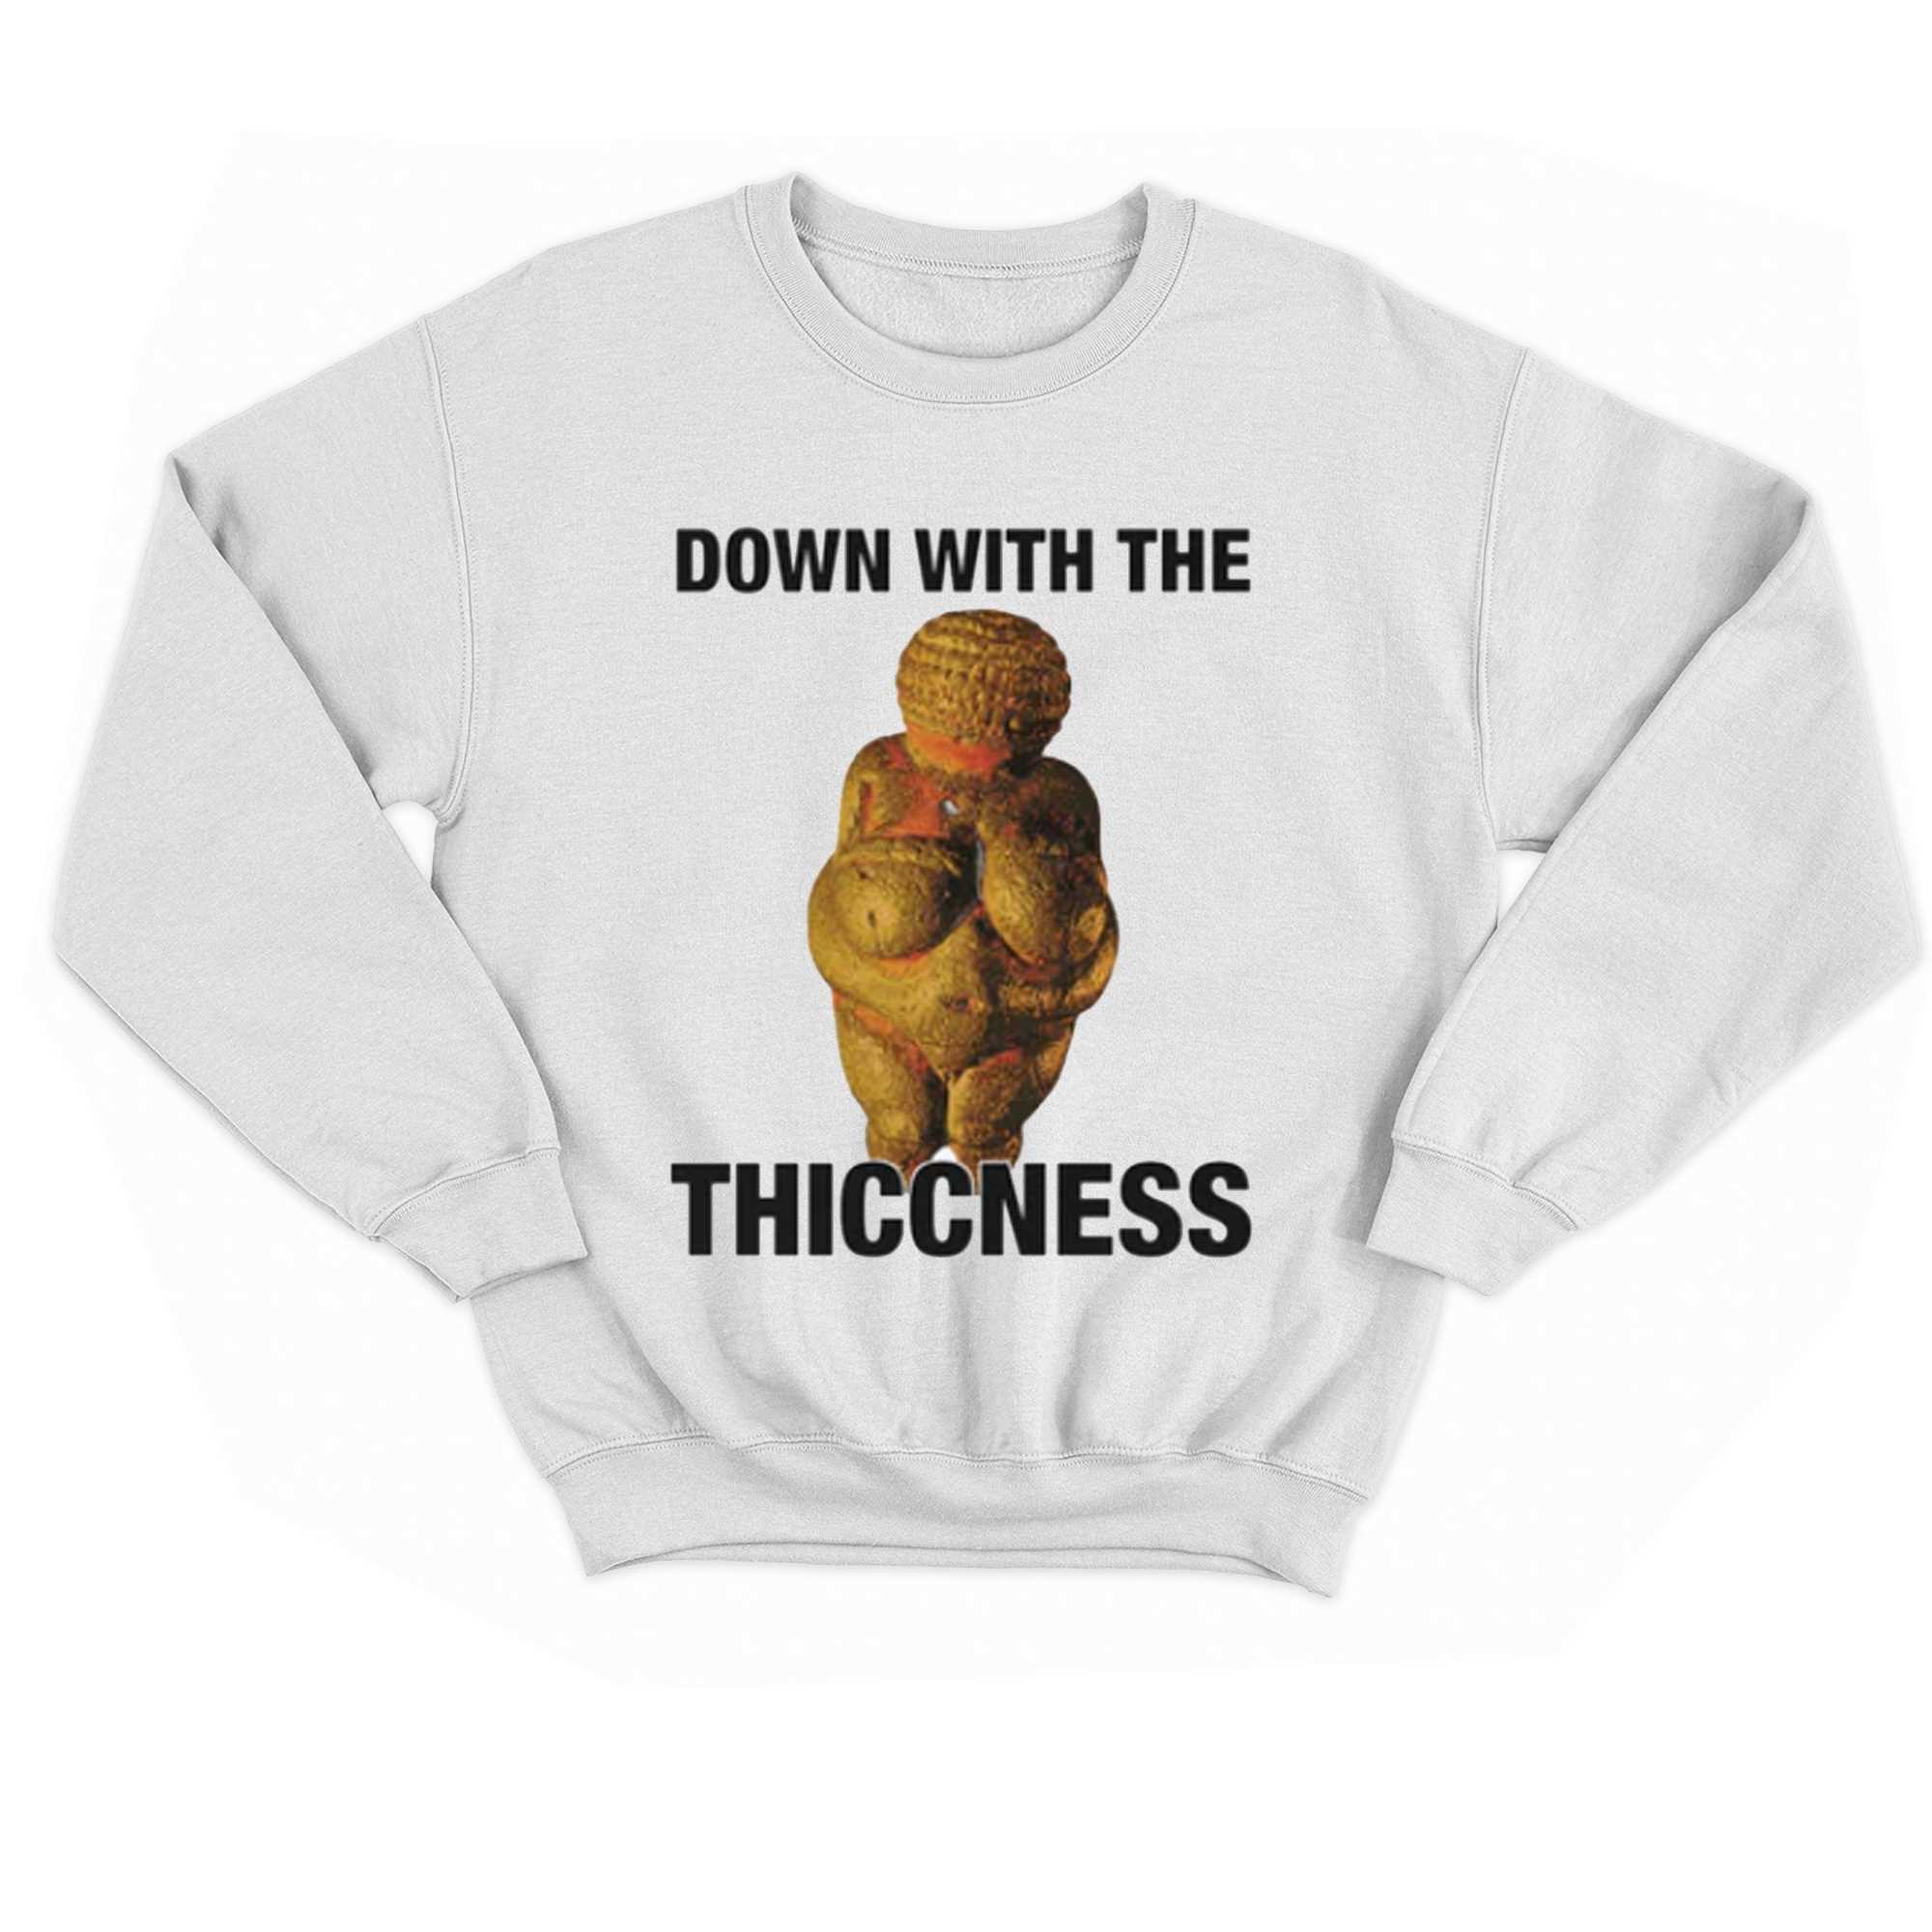 Down With The Thiccness T-shirt 